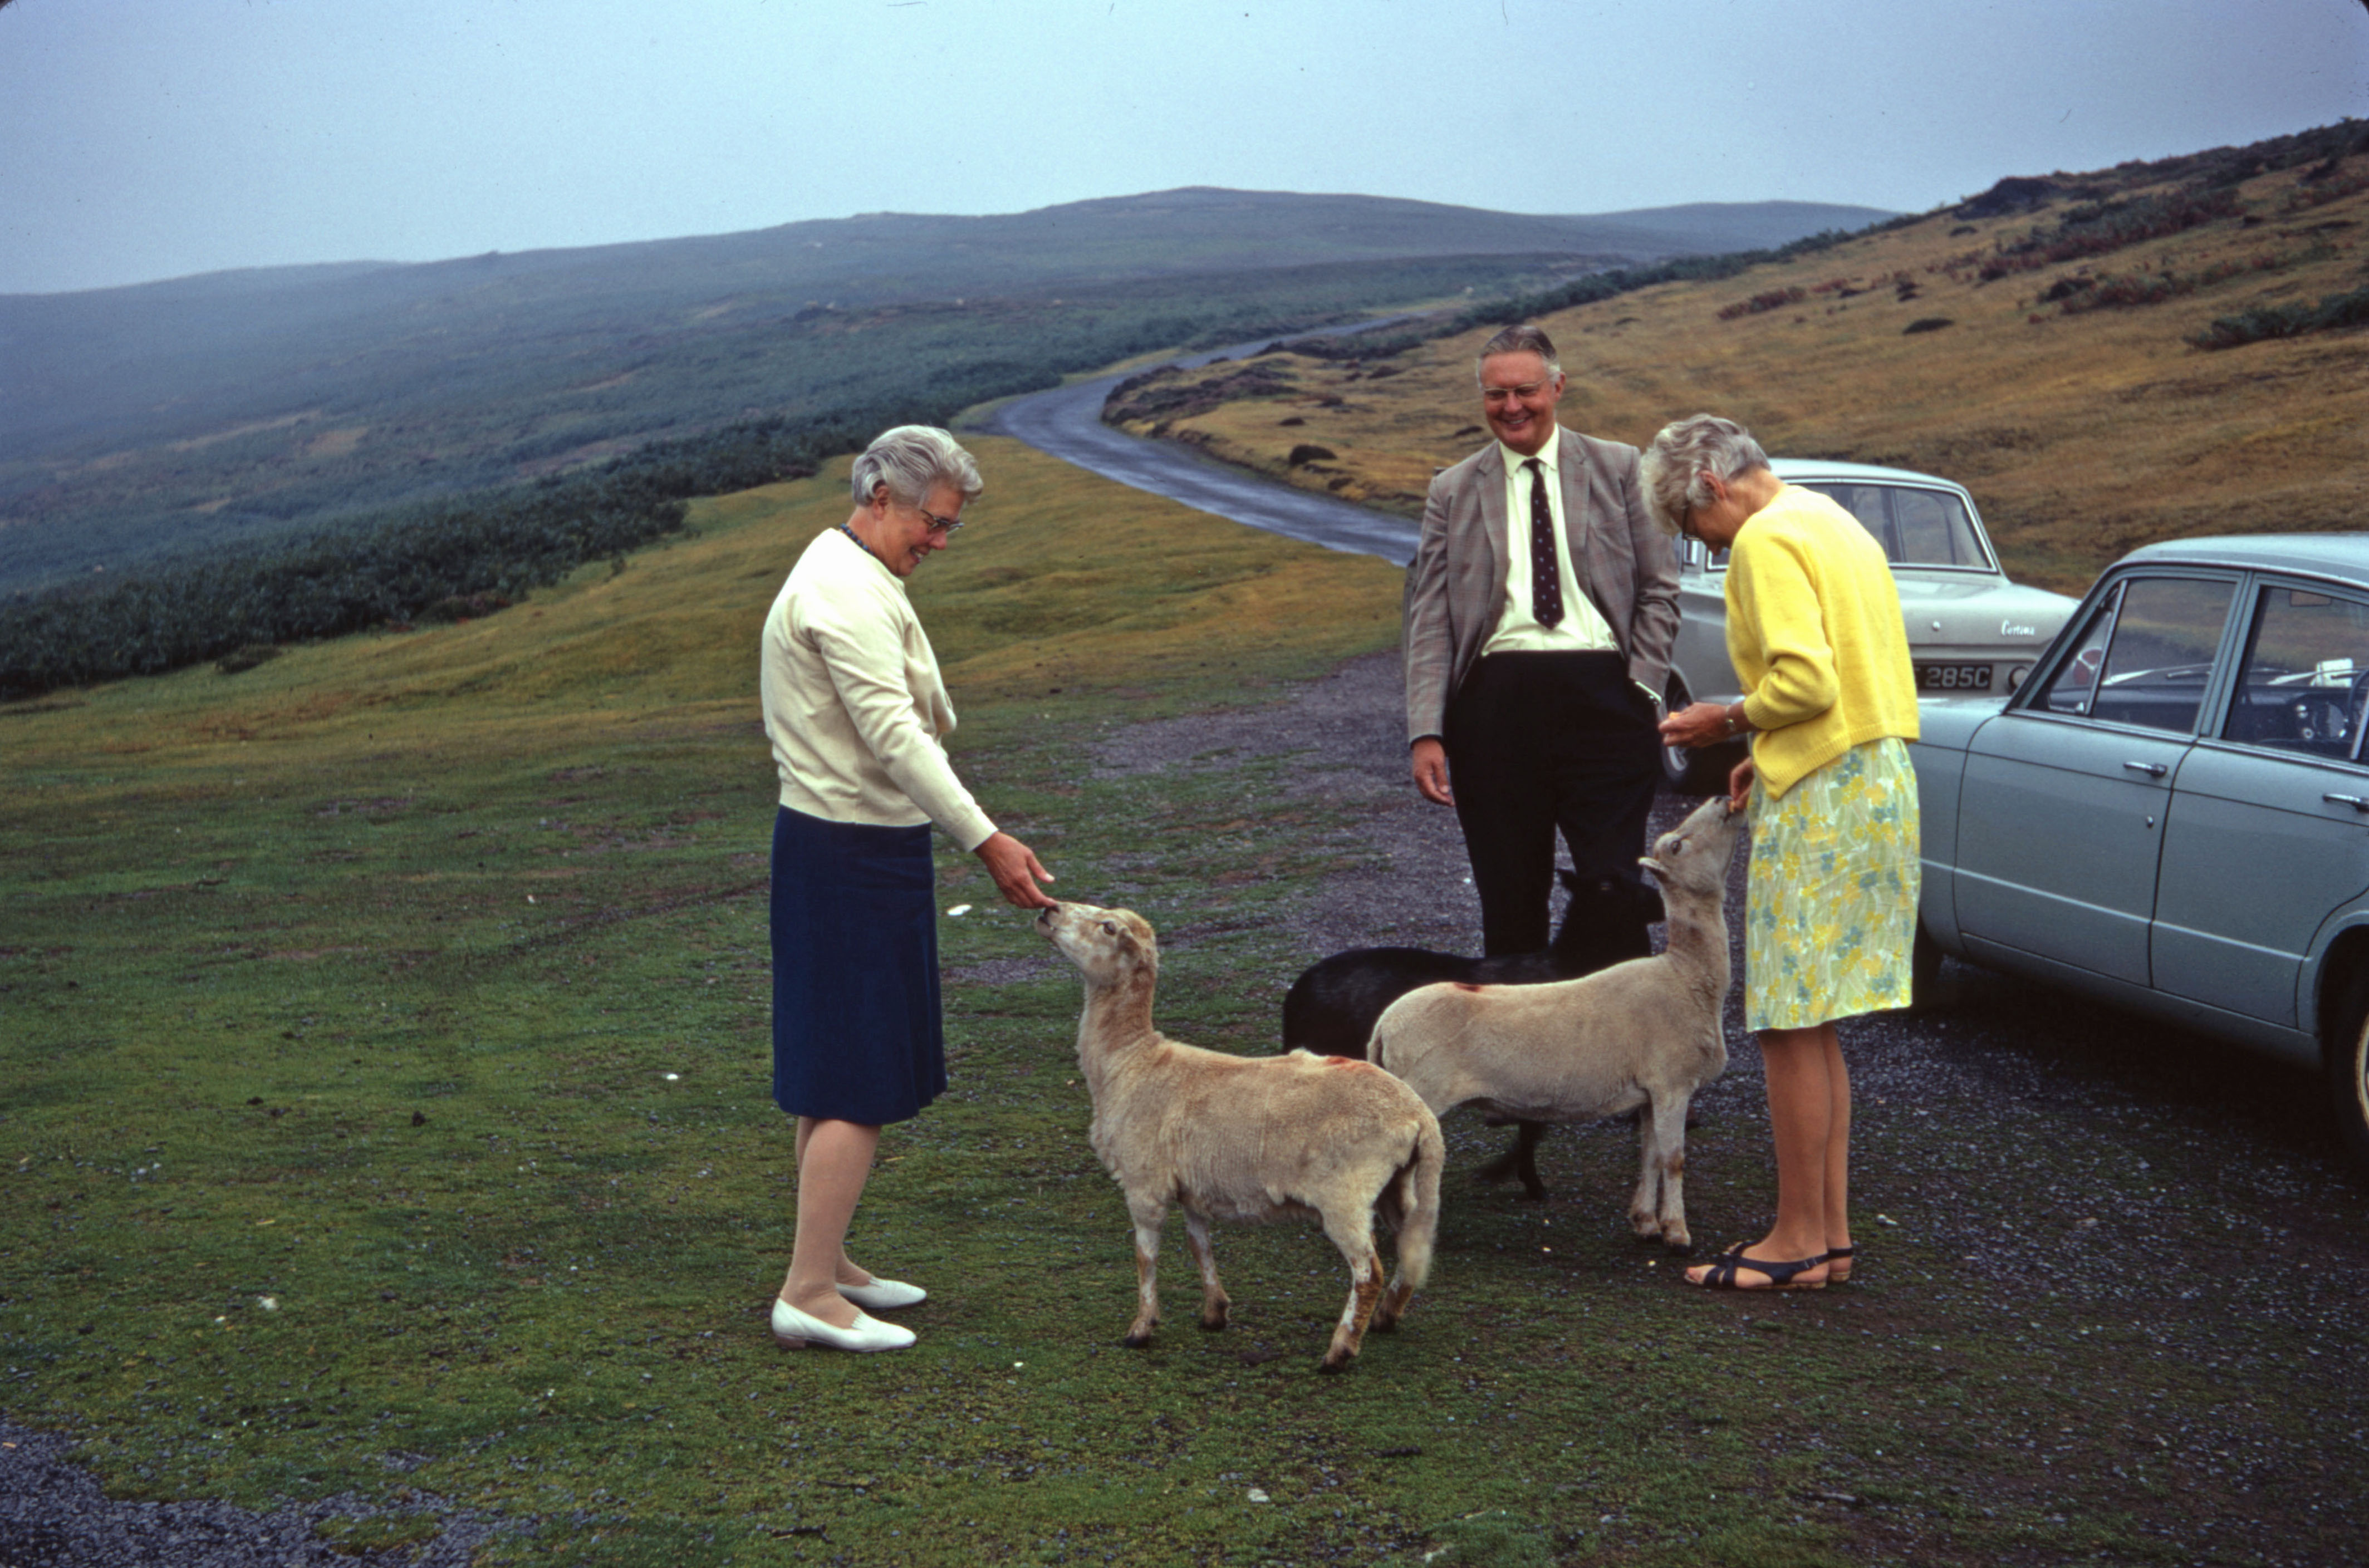 13 Aug 1969 Steve, Fred and Joan feeding the sheep at Long Mynd, Shropshire after Edward's wedding.